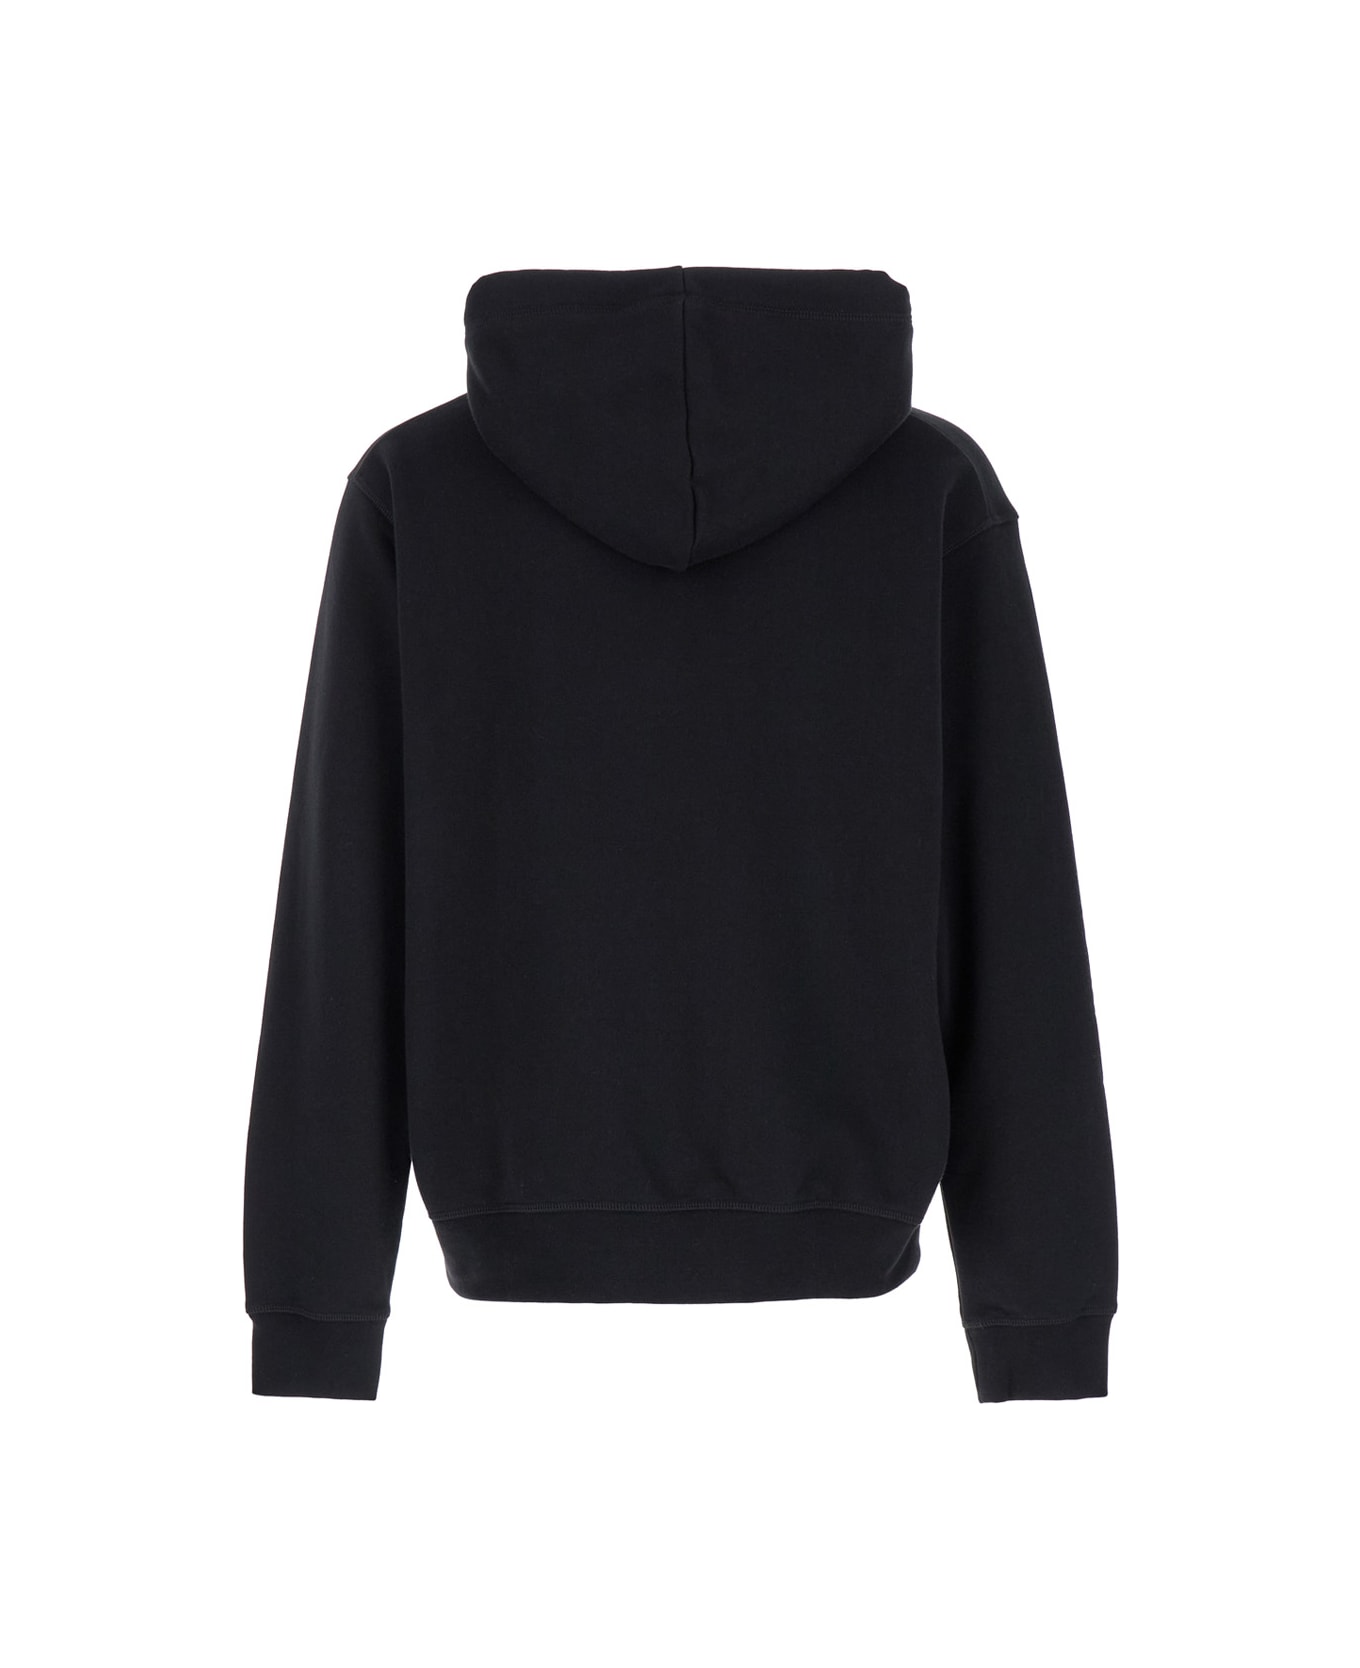 Dsquared2 Black Hoodie With Logo Print In Cotton Man - Black